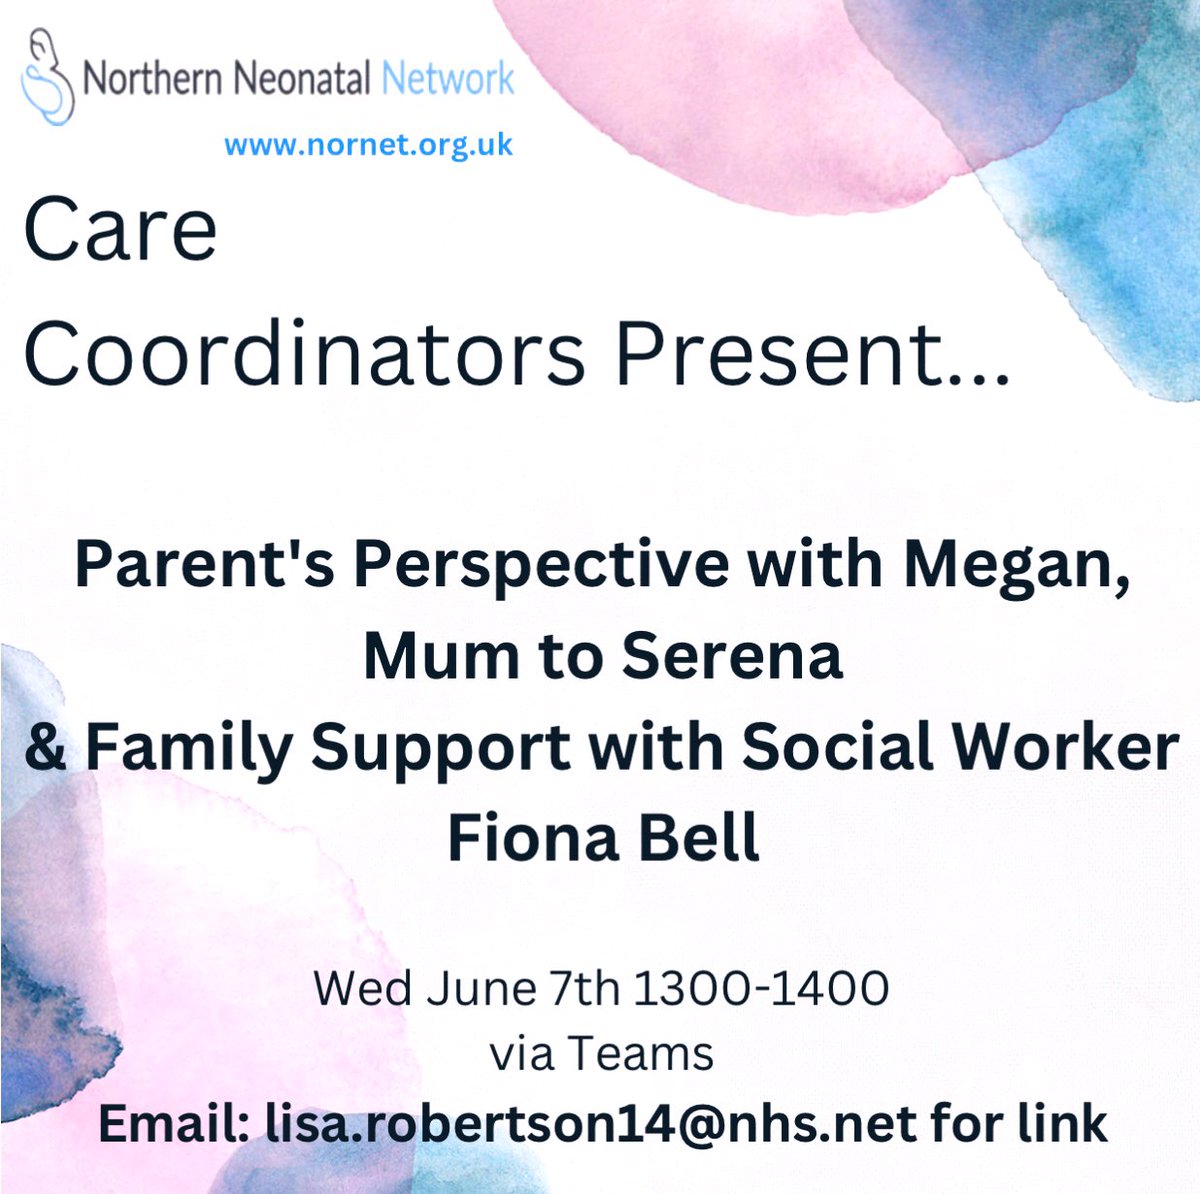 Join us this Wed 1300-1400 via Teams to hear a #parent #perspective of #nicu & find out more about the role of #neonatal #socialwork @TinyLivesTrust @NorNetUK #FICare #parent #voice #support